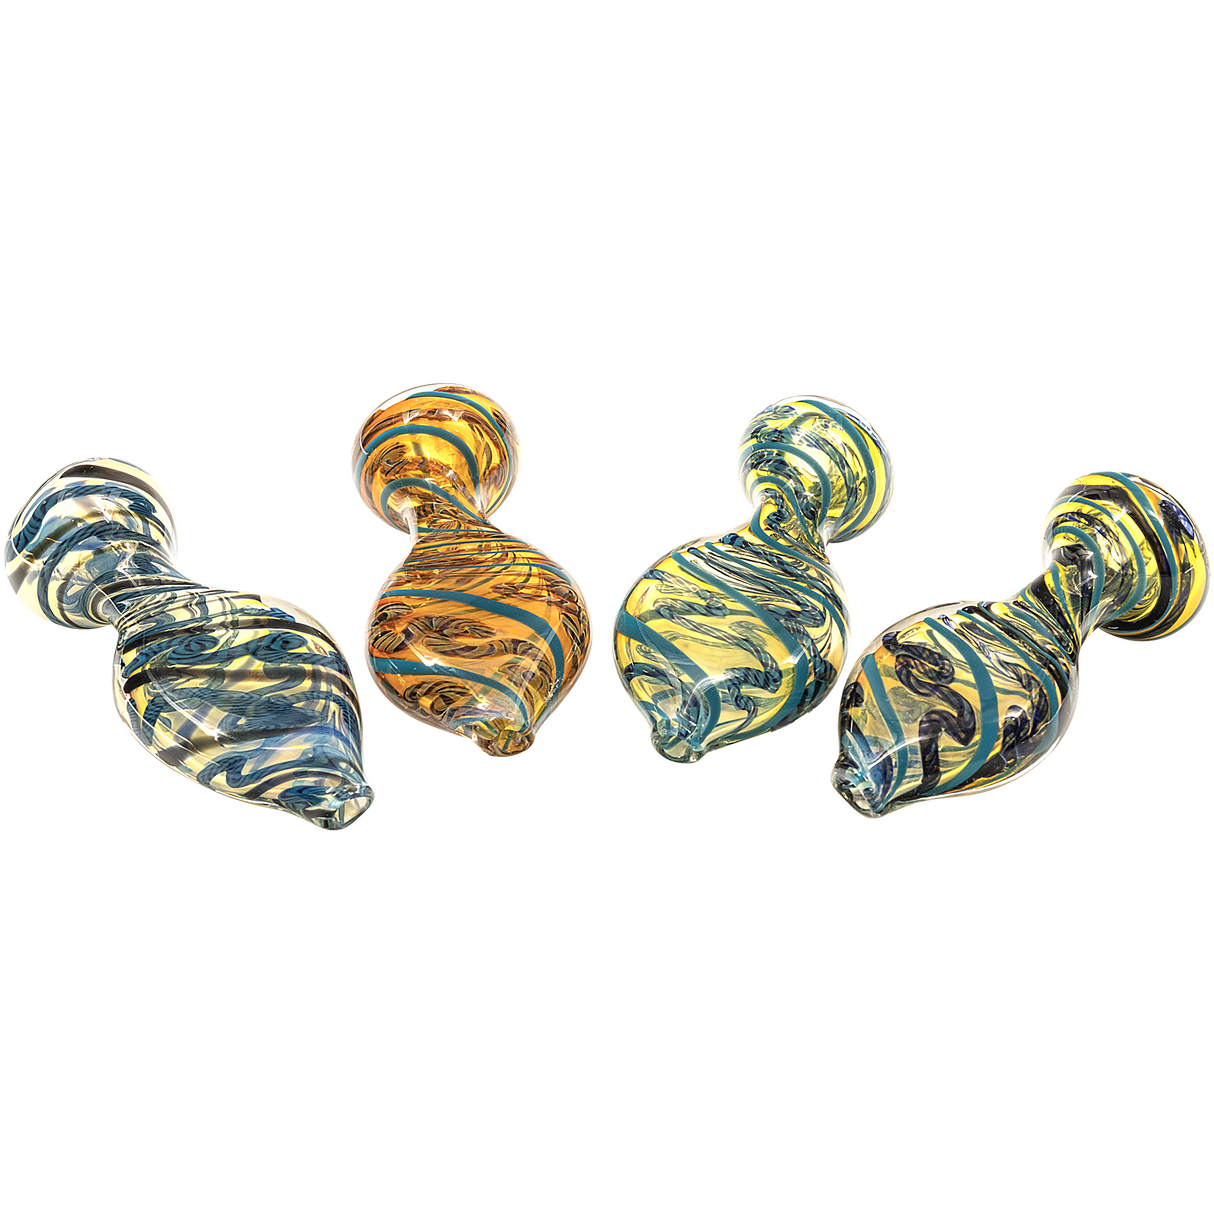 LA Pipes "Flat Belly" Inside-Out Fumed Color Changing Chillum, Compact Design